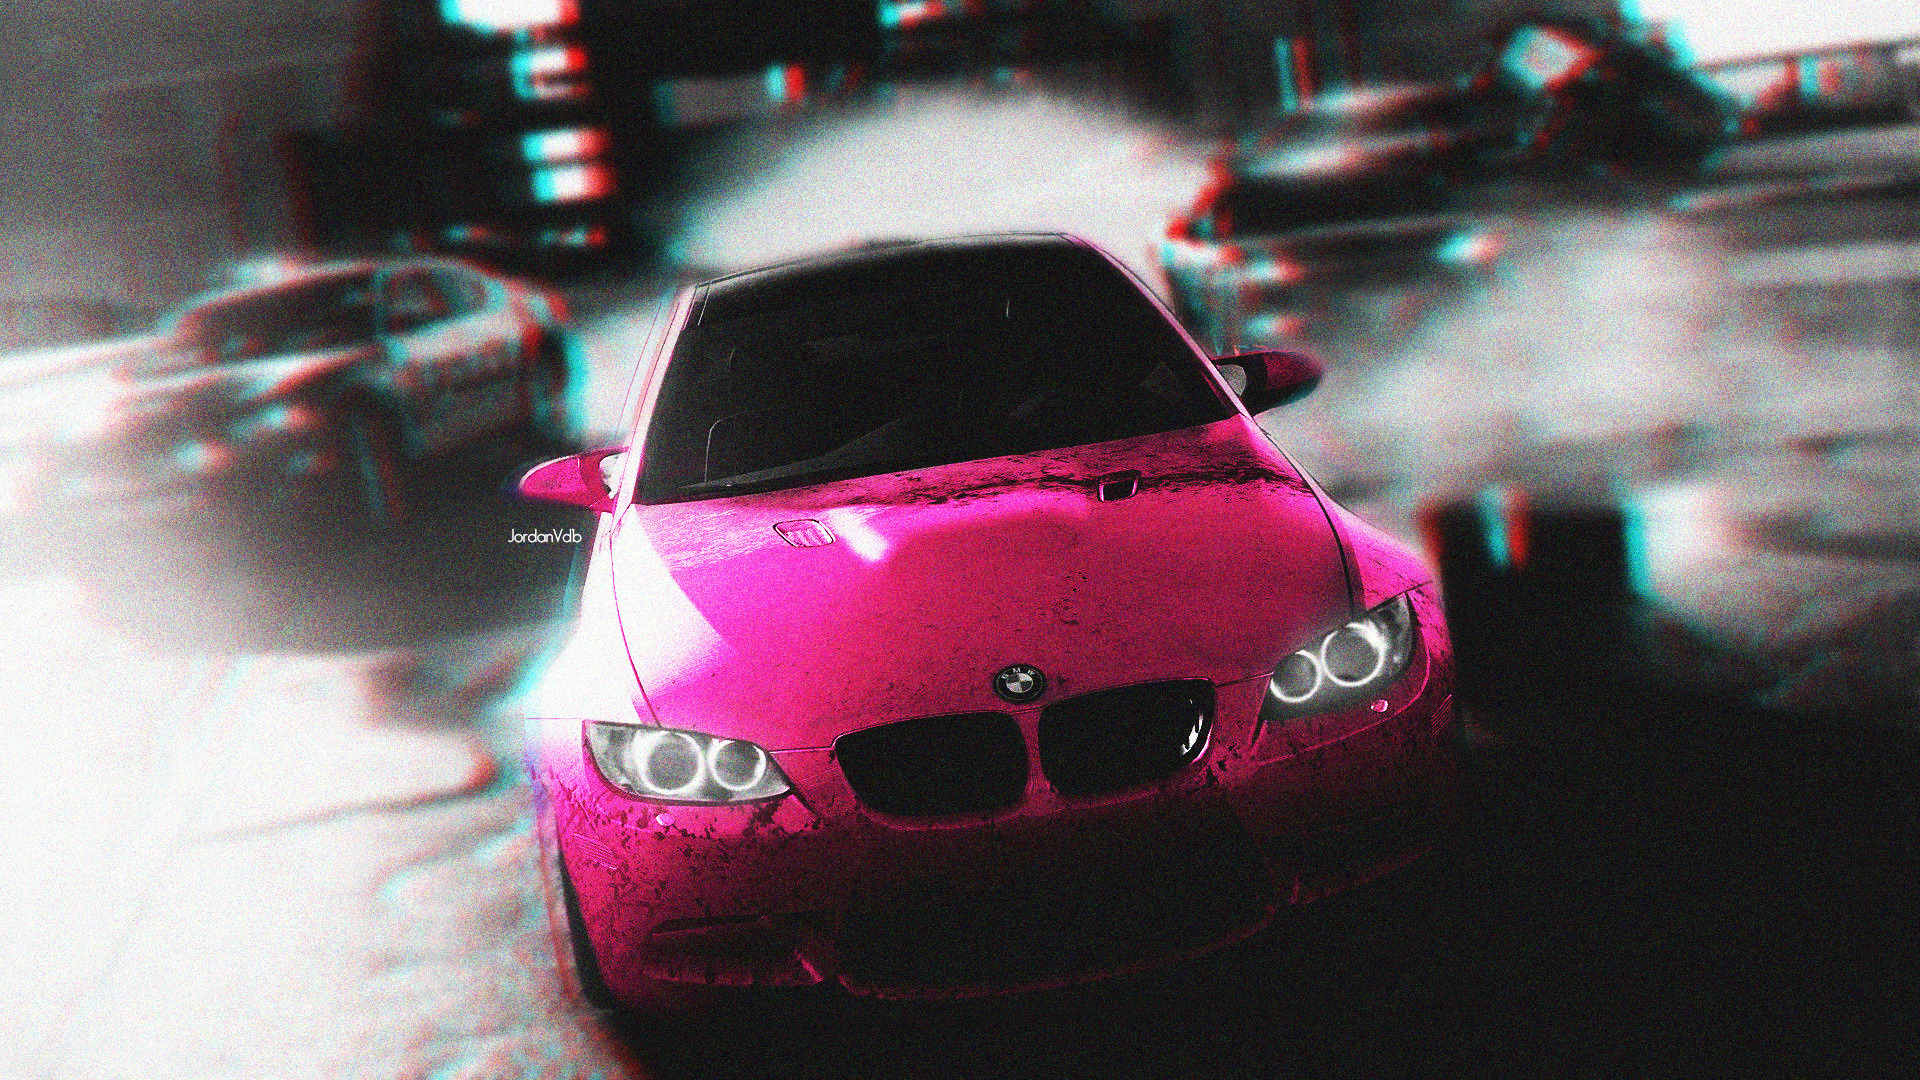 police, Car, Pink, Need For Speed, Artwork, Photoshopped, Selective Coloring, Video Games, BMW M3 Wallpaper